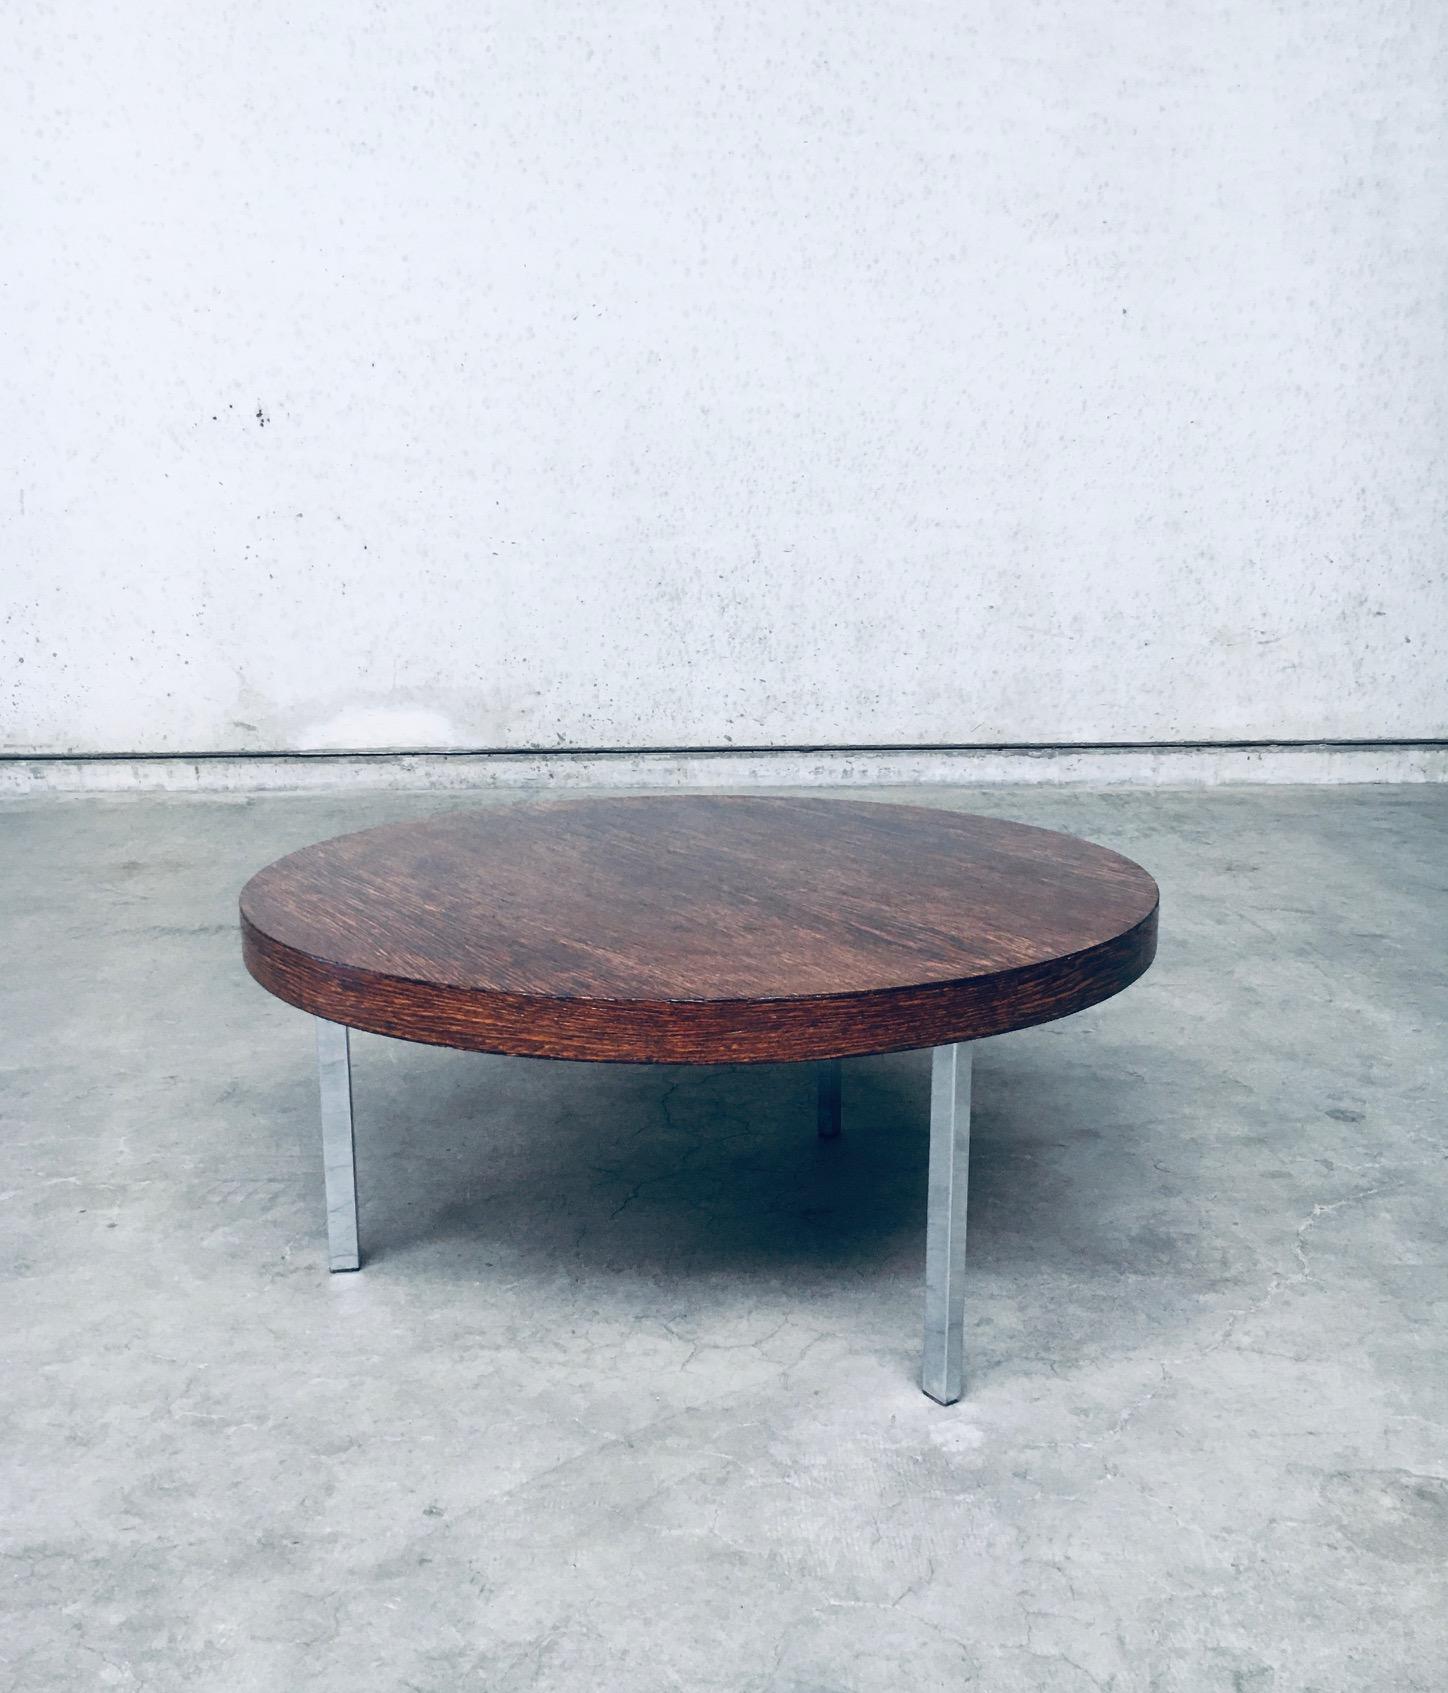 Vintage Midcentury Modern Dutch Design Round Tripod Wenge Coffee Table. Made in the Netherlands, 1960's period. Wenge wood veneer on chrome tripod feet. Minimalist design on this smaller size round coffee or side table. This comes in very good, all